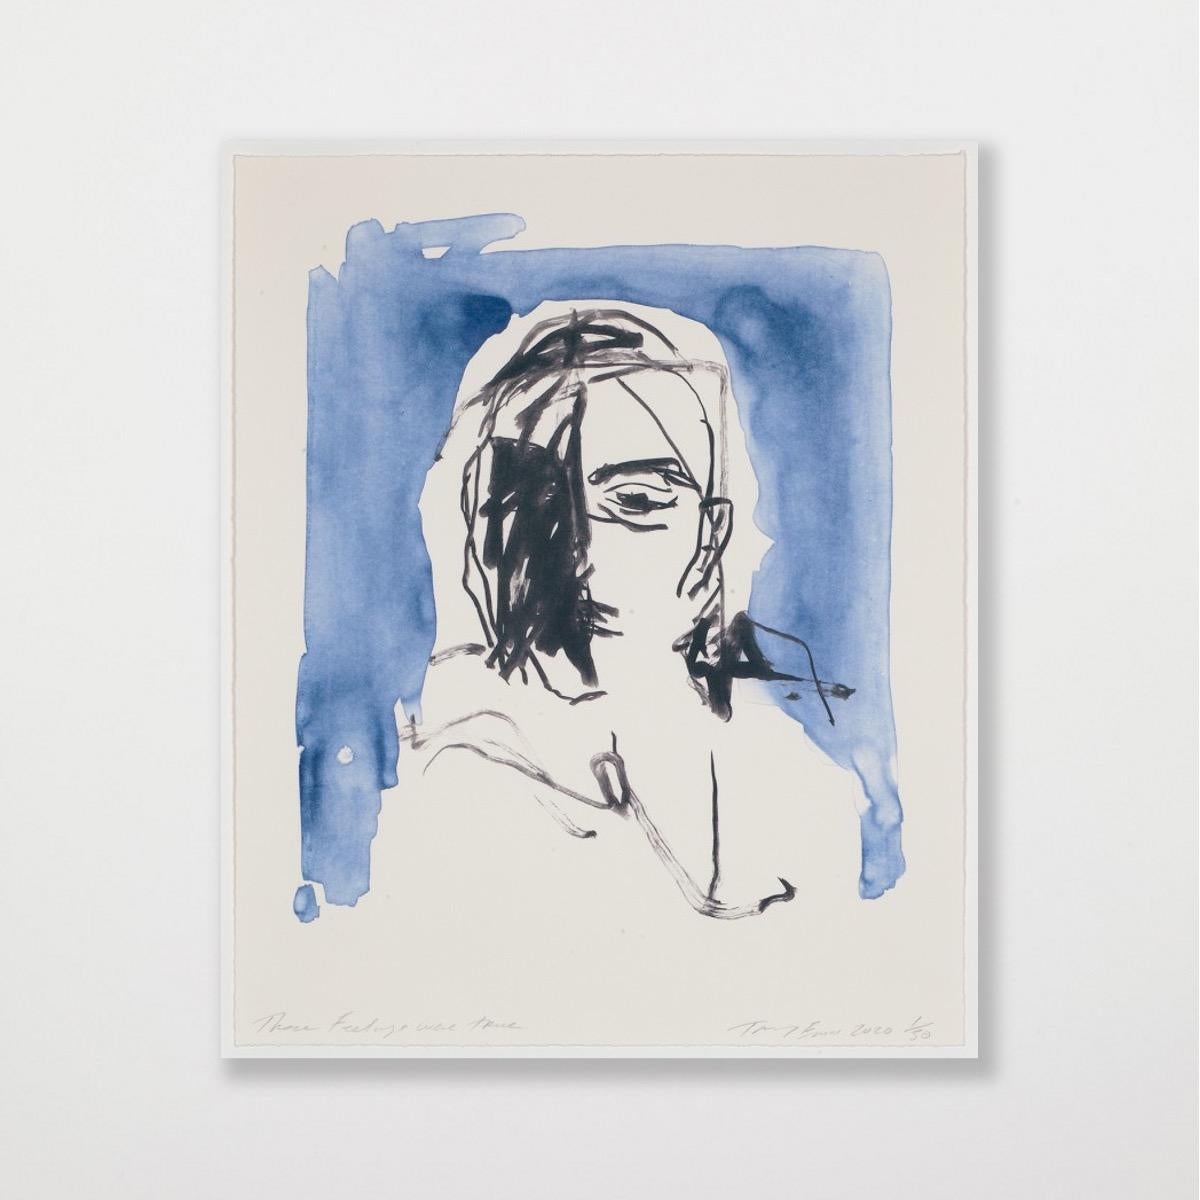 These Feelings Were True - Emin, Contemporary, YBAs, Lithograph, Portrait, Blue - Young British Artists (YBA) Print by Tracey Emin